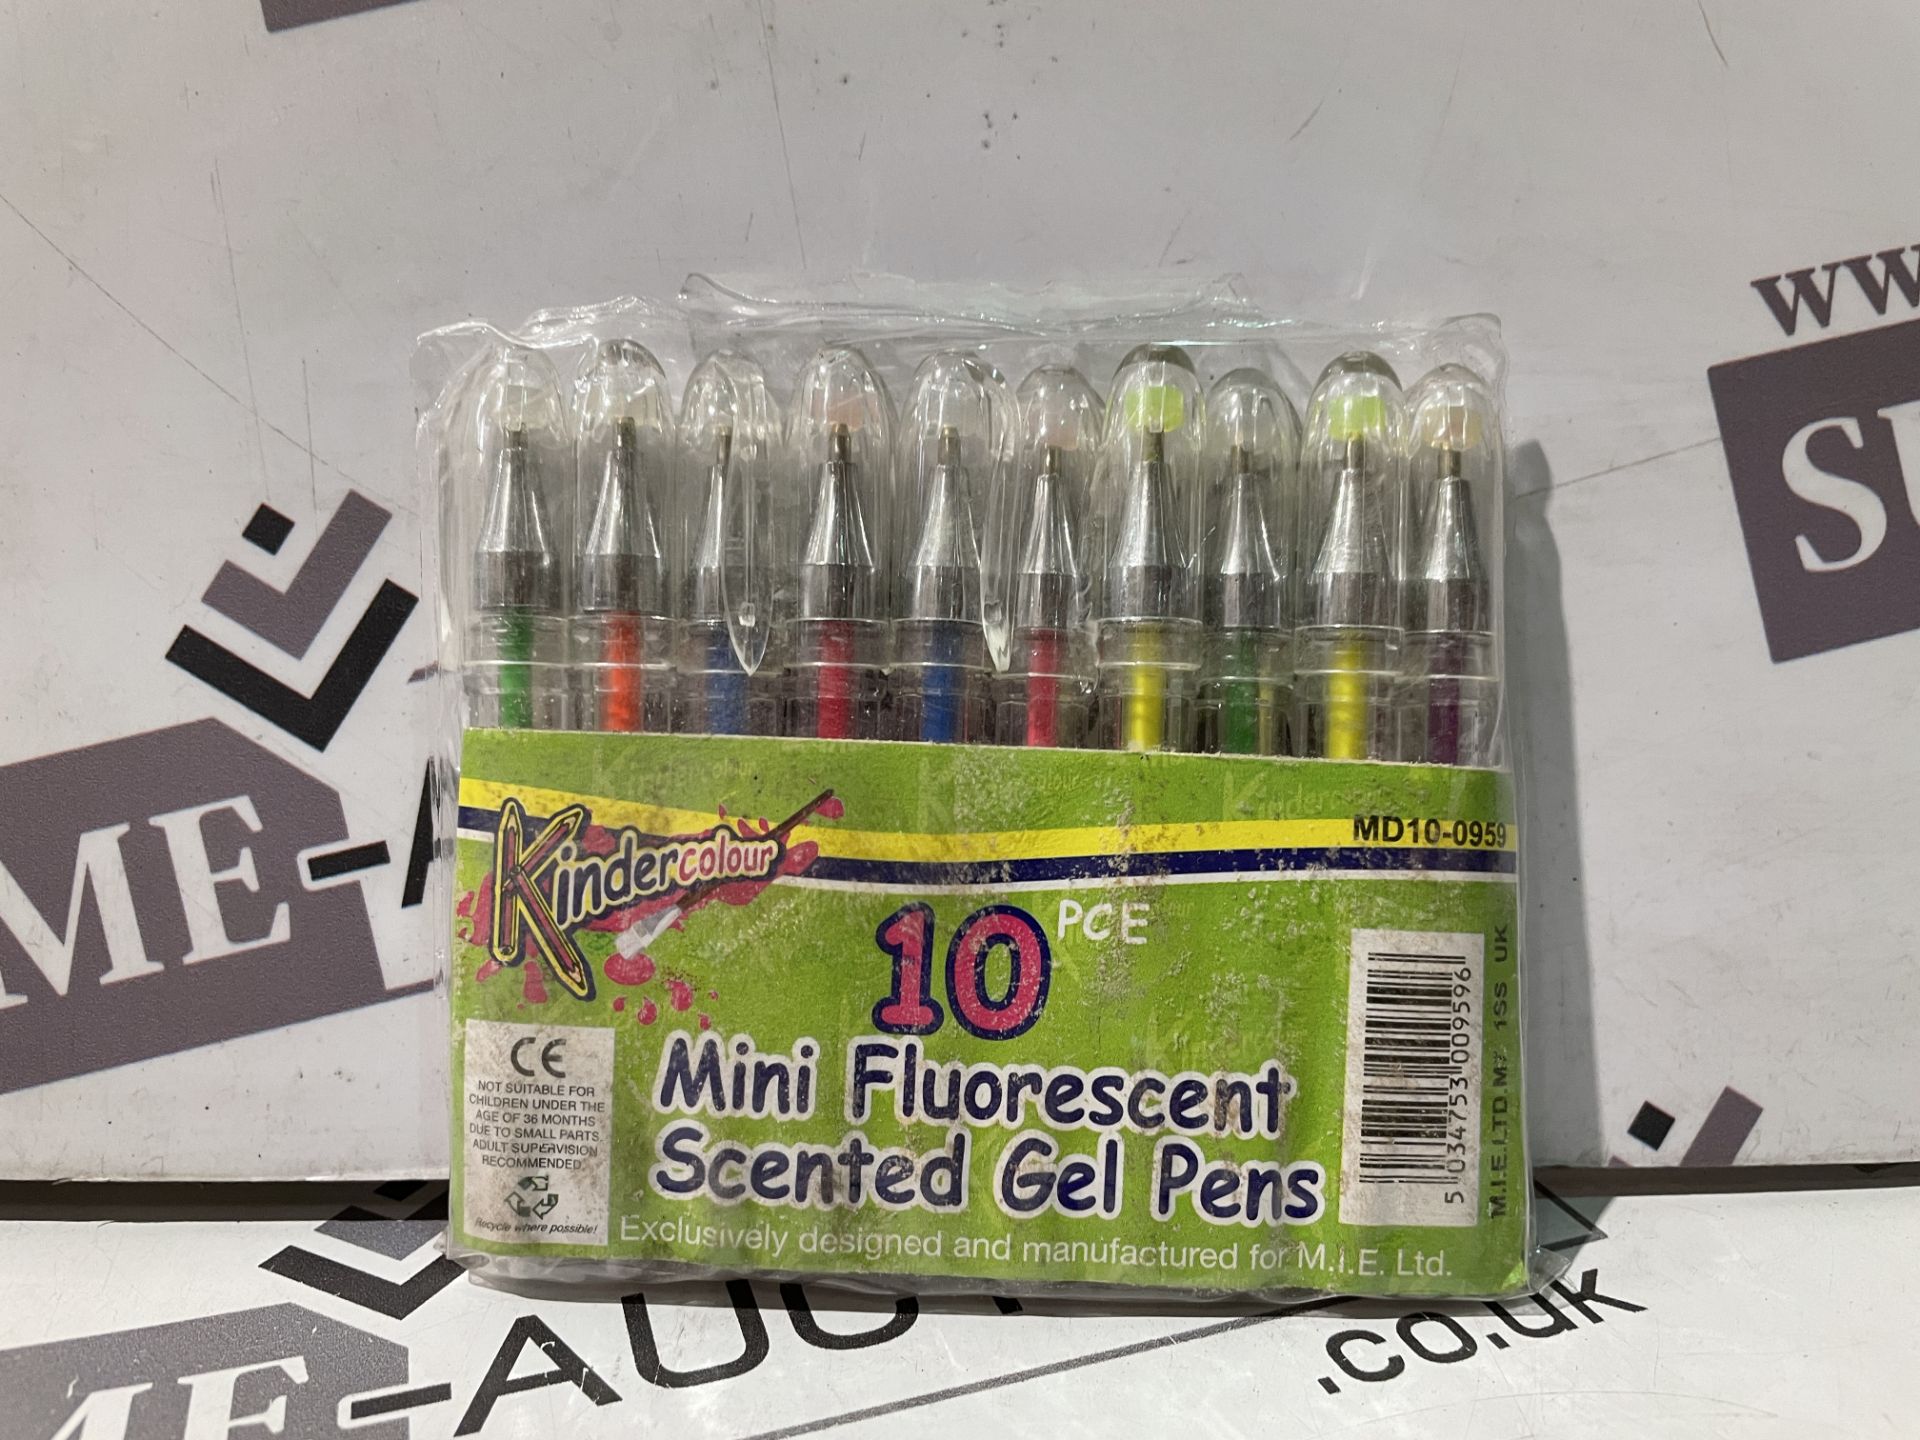 144 X BRAND NEW PACKS OF 10 MINI FLUORESCENT SCENTED GEL PENS R16.9